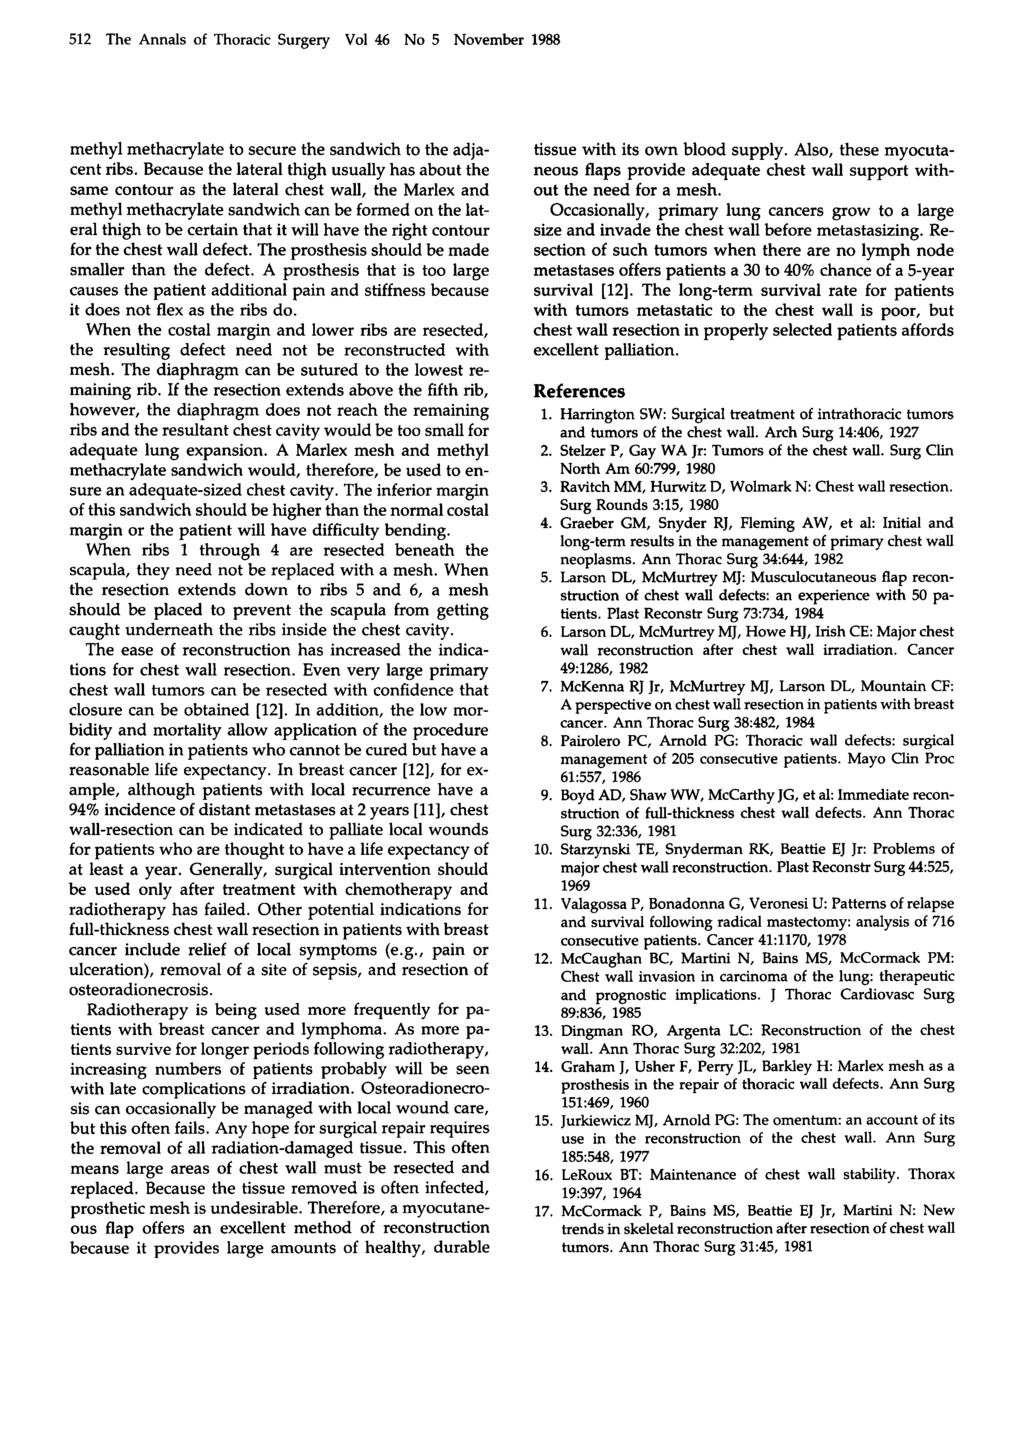 512 The Annals of Thoracic Surgery Vol 46 No 5 November 1988 methyl methacrylate to secure the sandwich to the adjacent ribs.